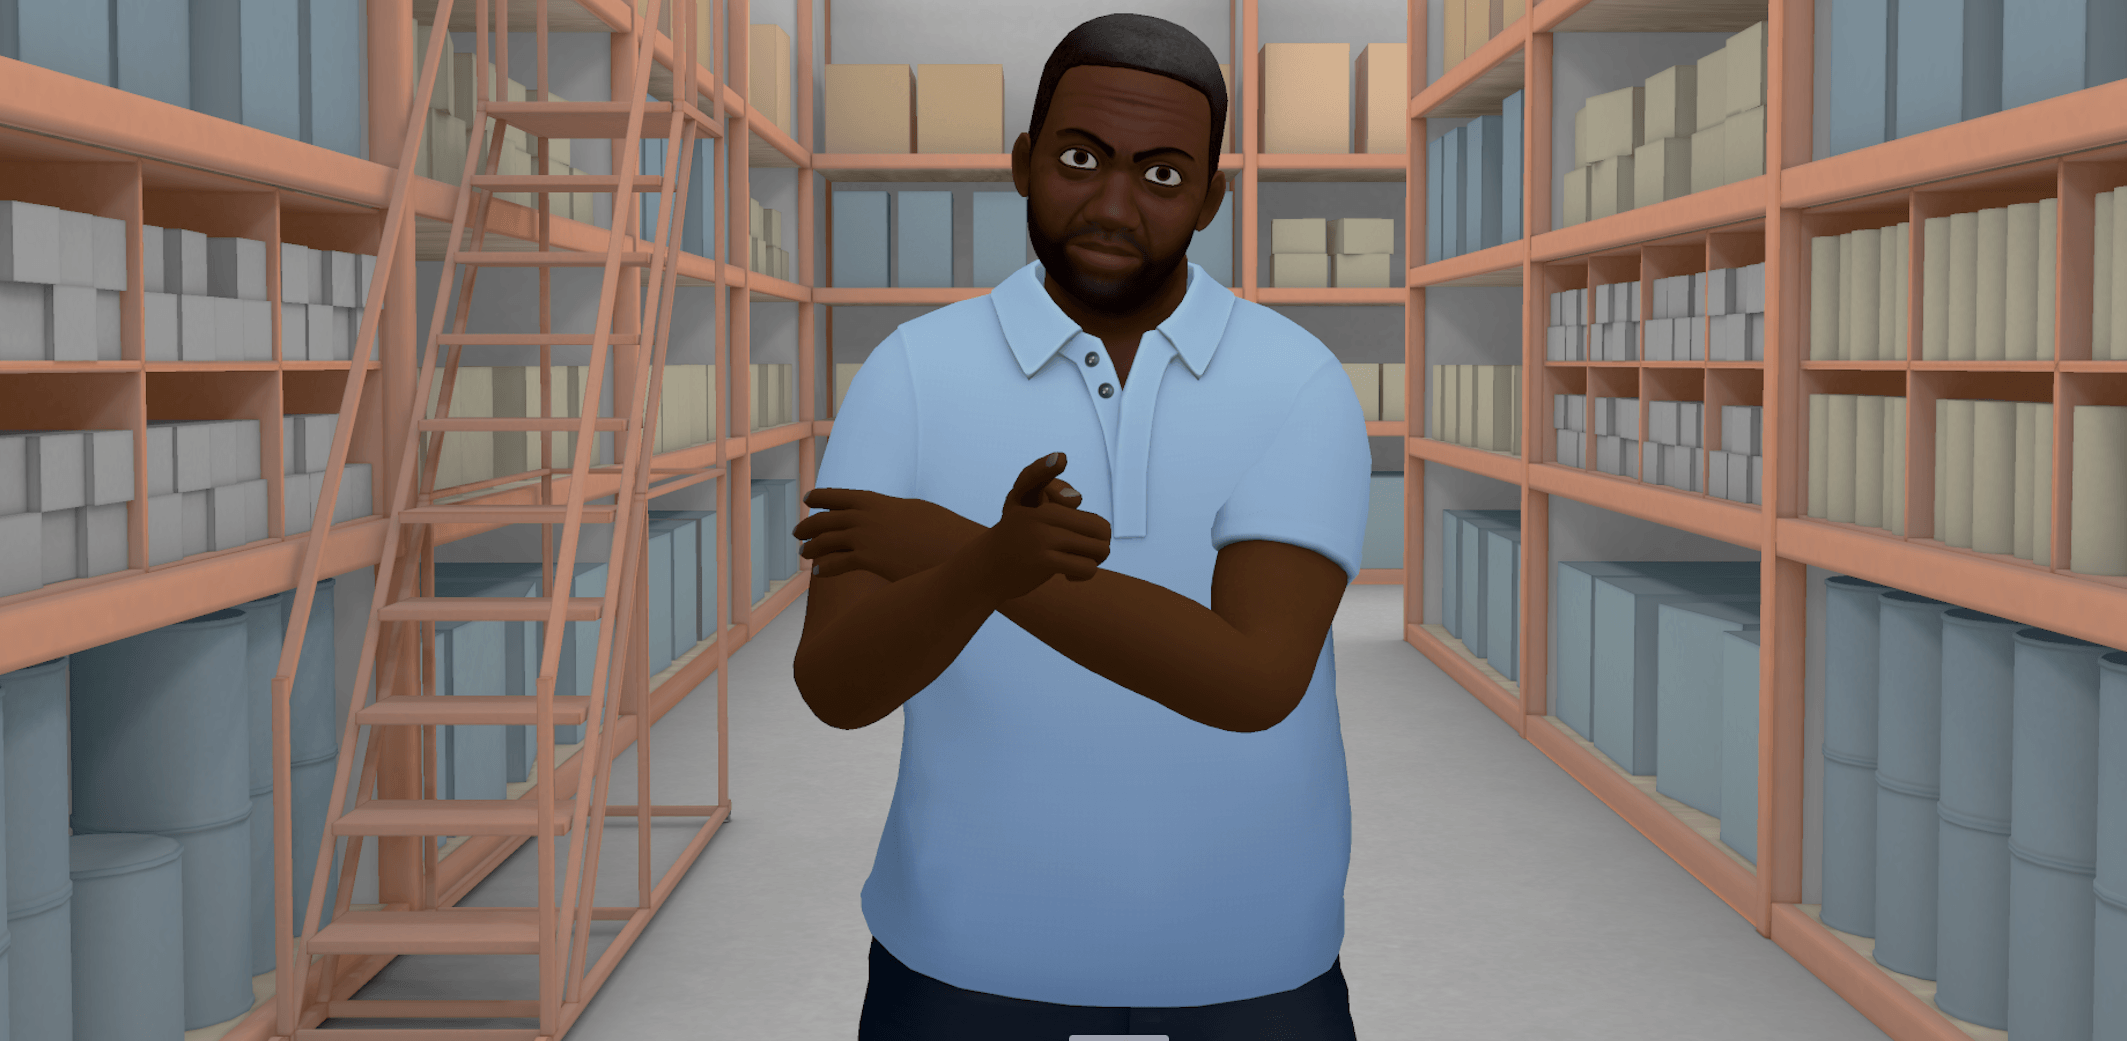 VR graphic of a black man in a warehouse looking serious and pointing at the viewer